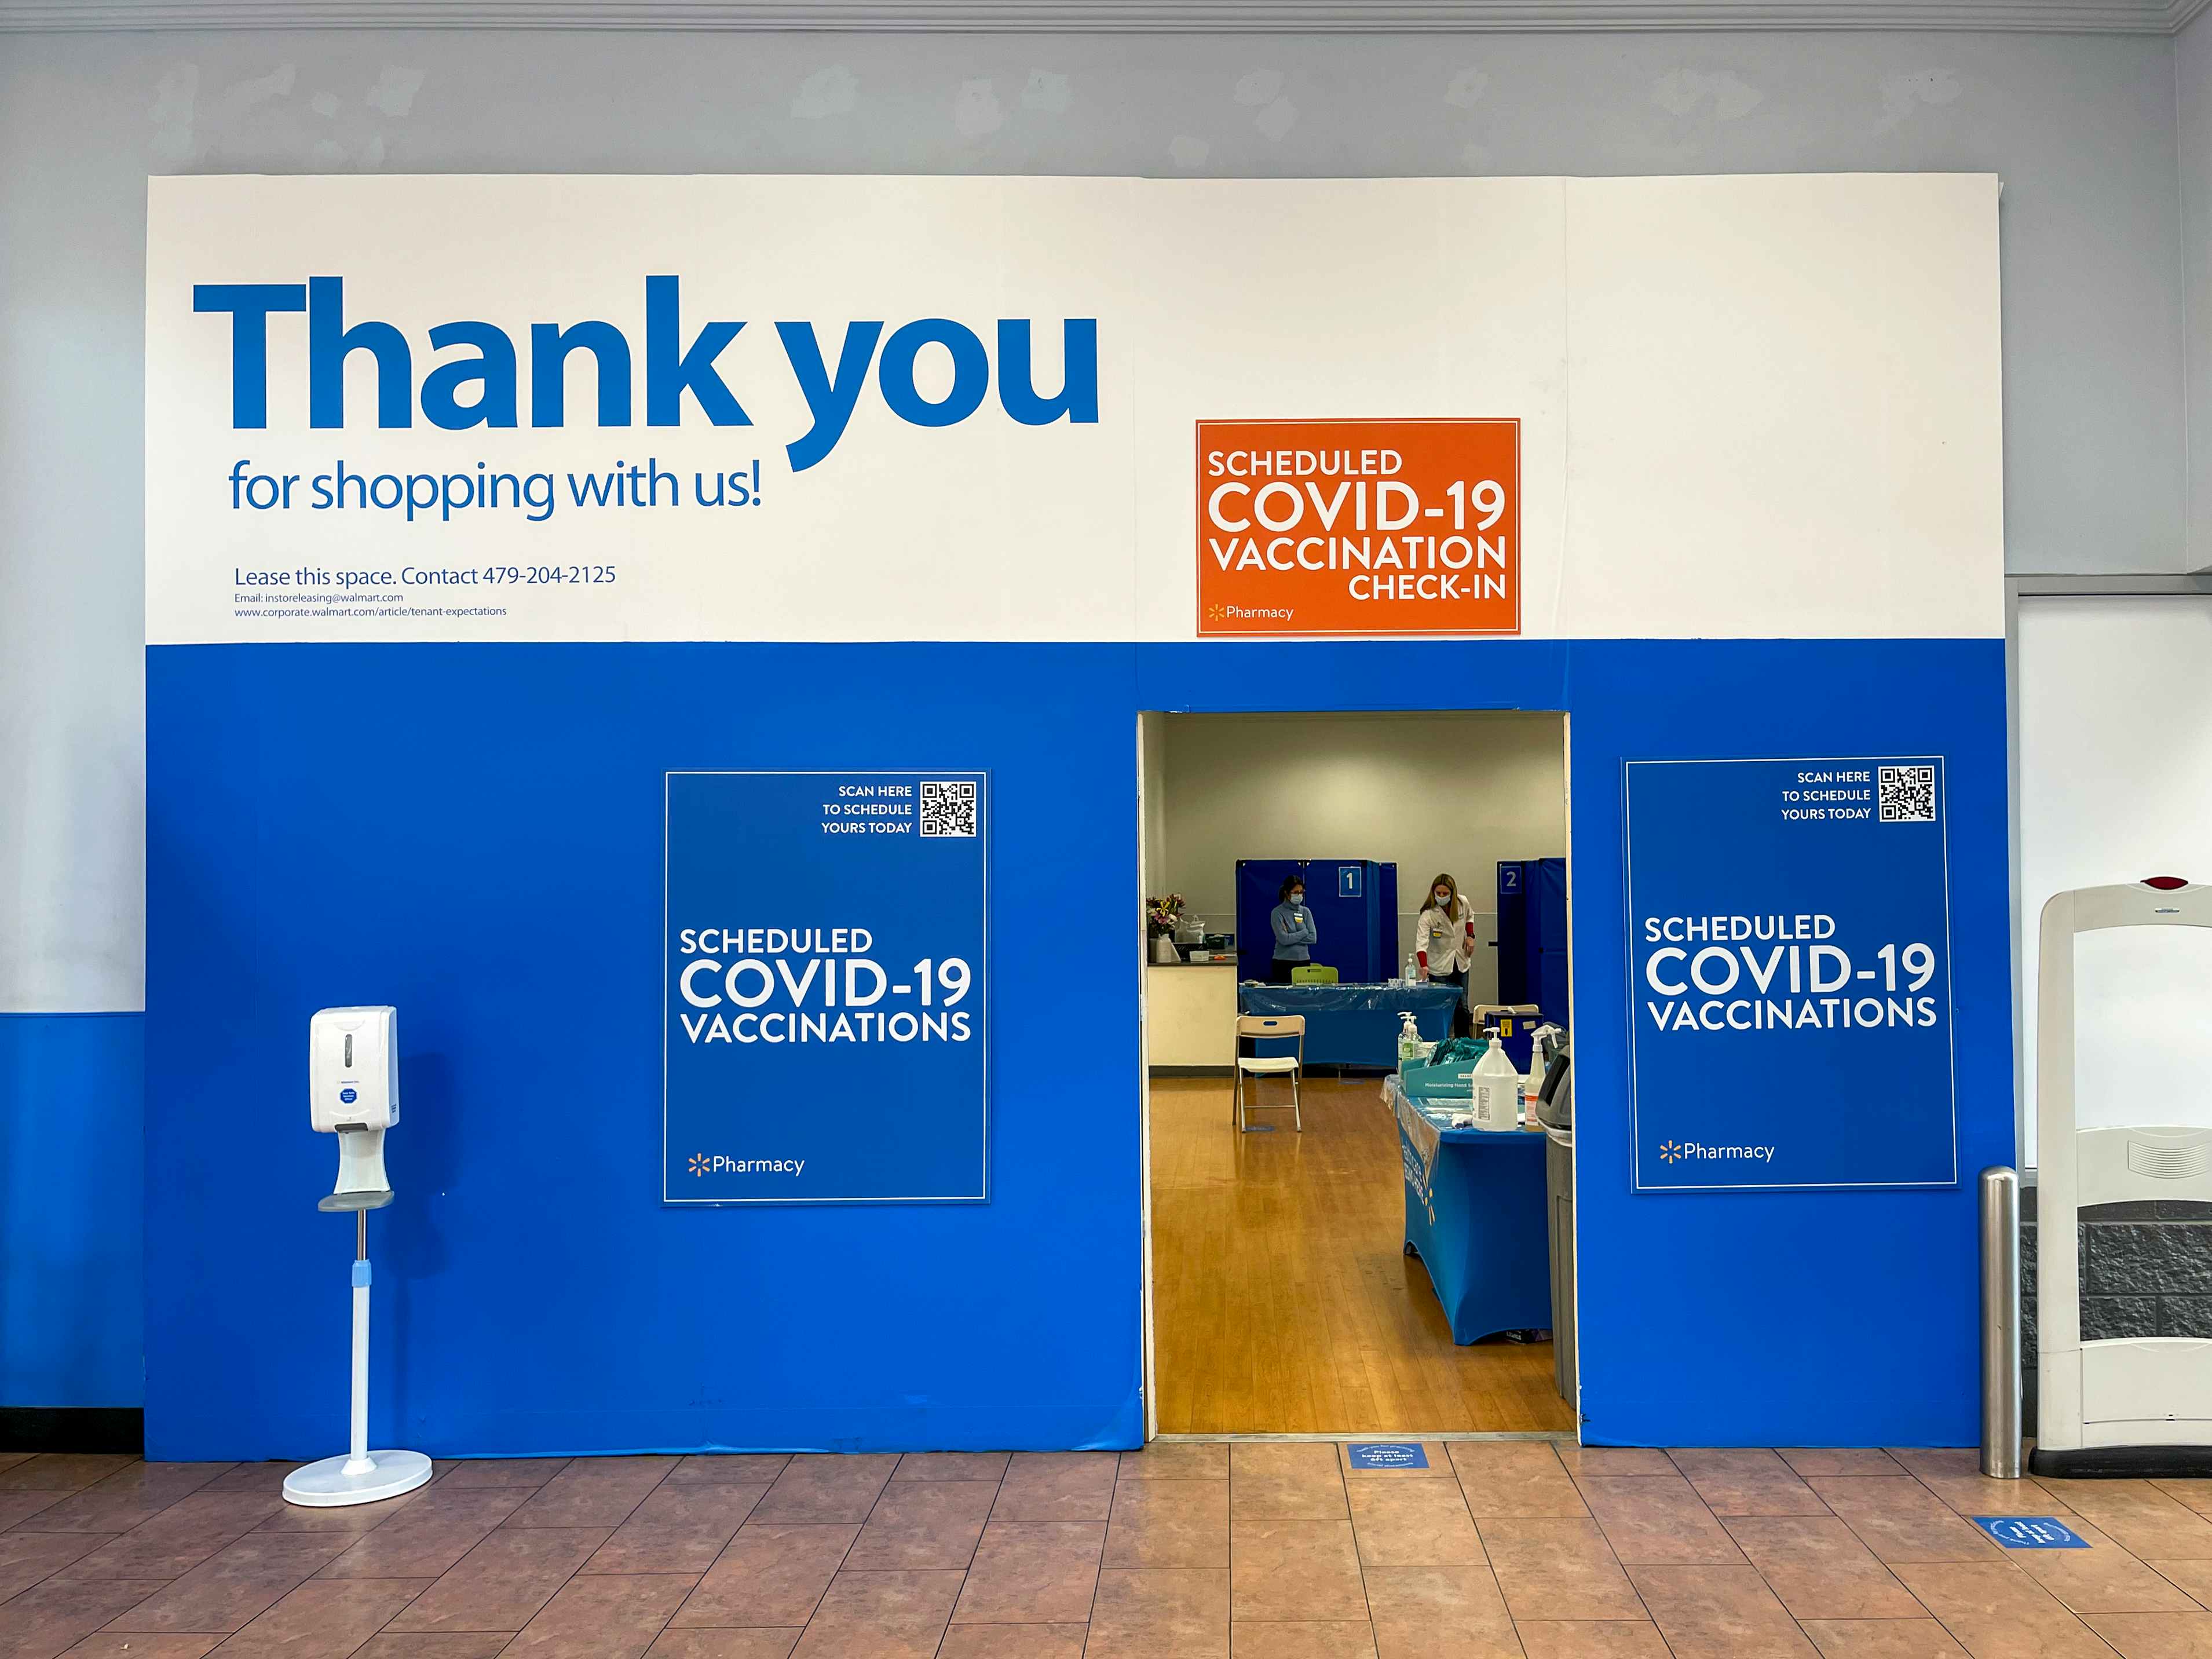 The COVID-19 vaccinations center inside Walmart